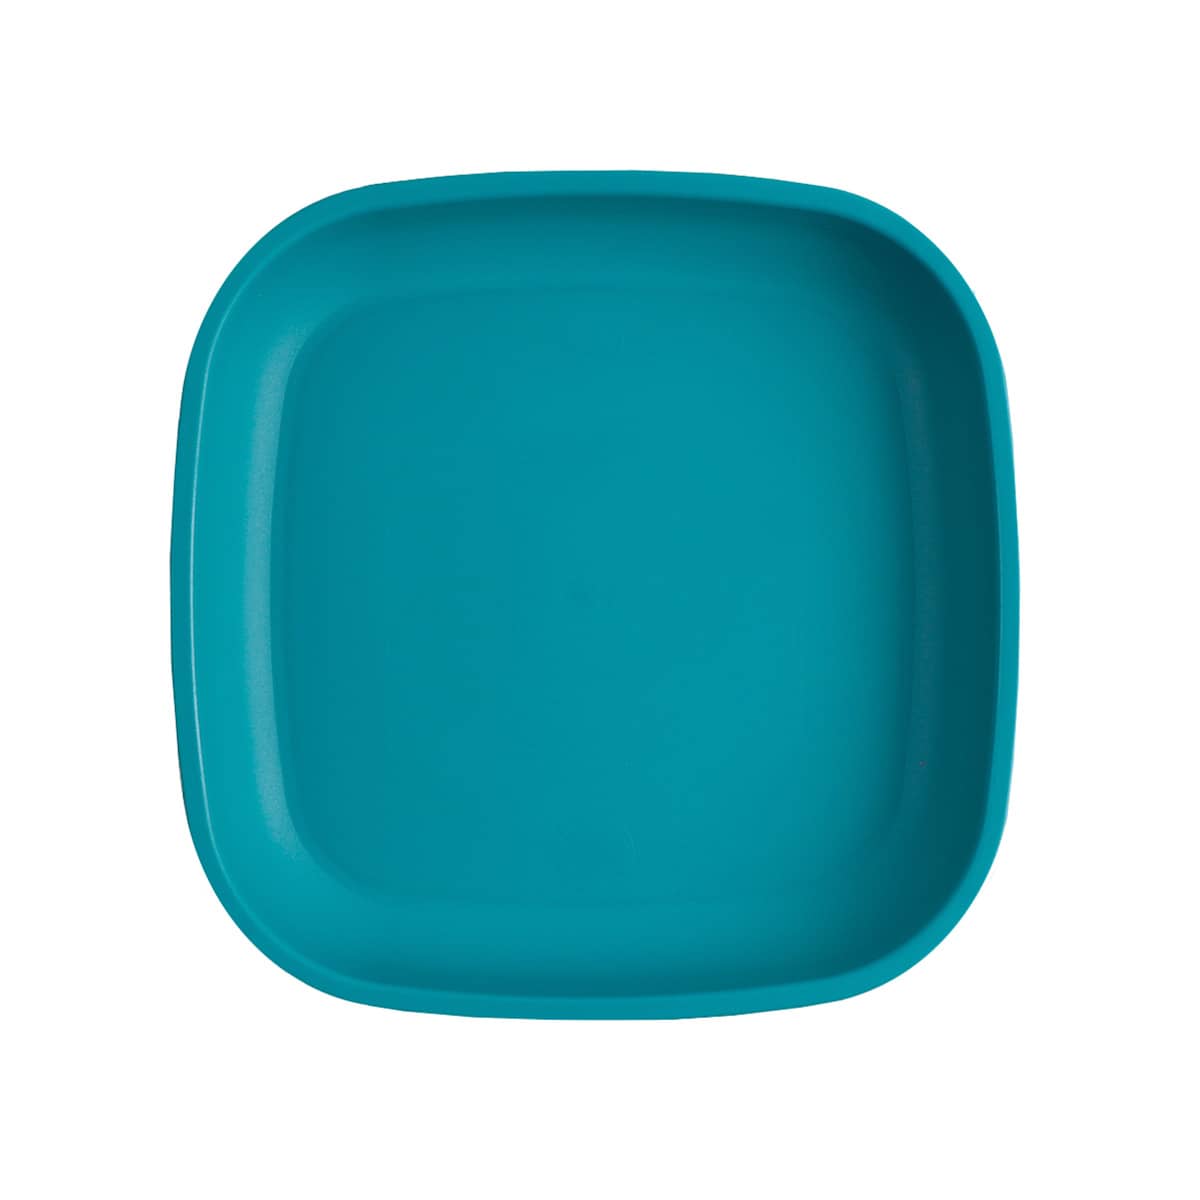 Re-Play Recycled Flat Plate - Teal